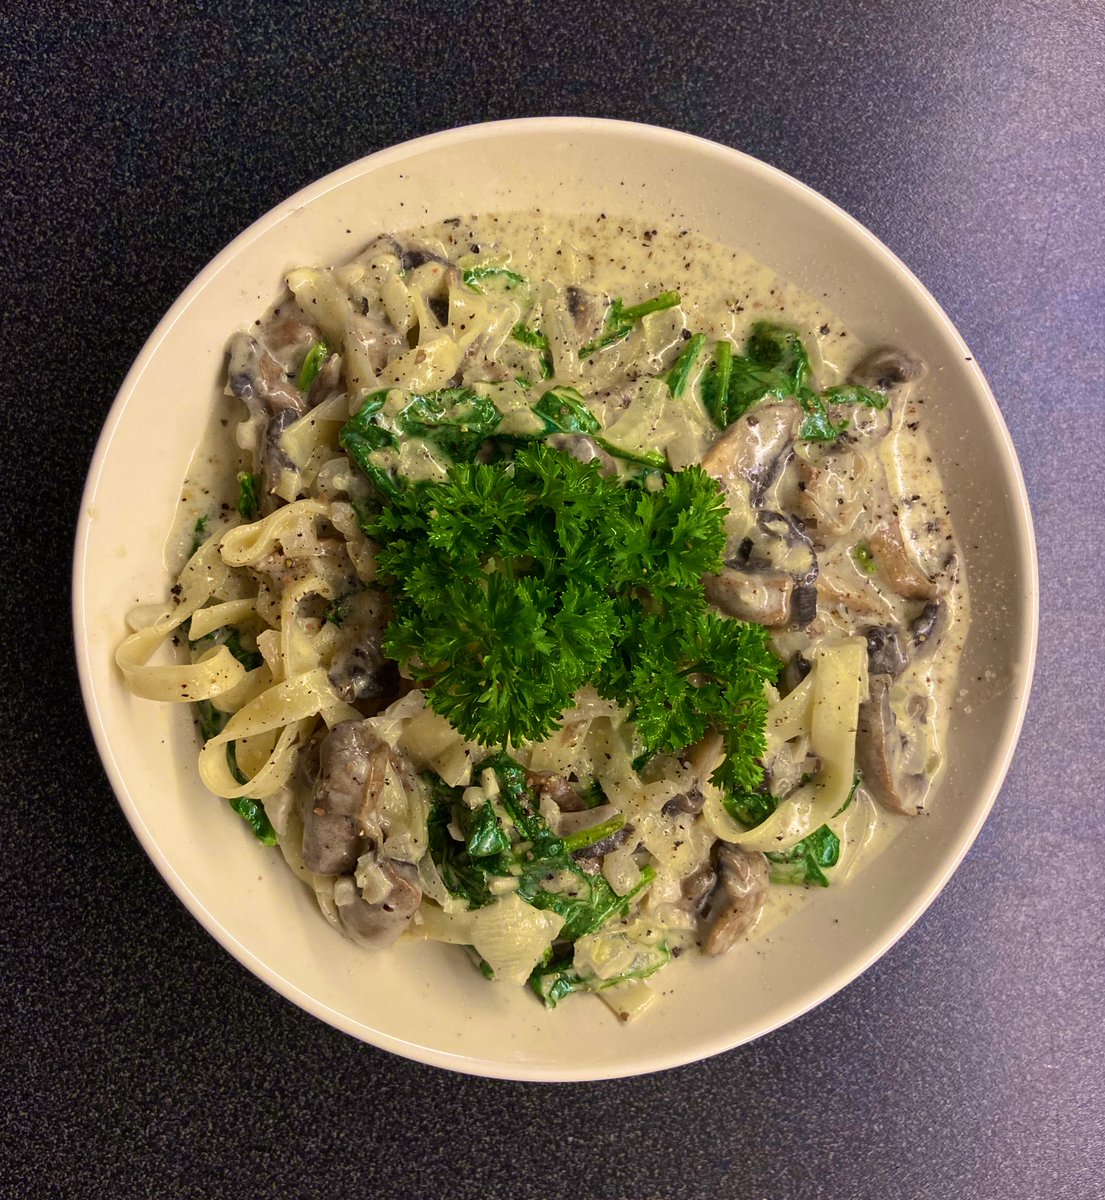 I was craving this all afternoon after my mans showed me pasta he ate so I made my own version of creamy mushroom spinach pasta. Yeah the portion too big for one person but I don’t care and will eat it all 😂